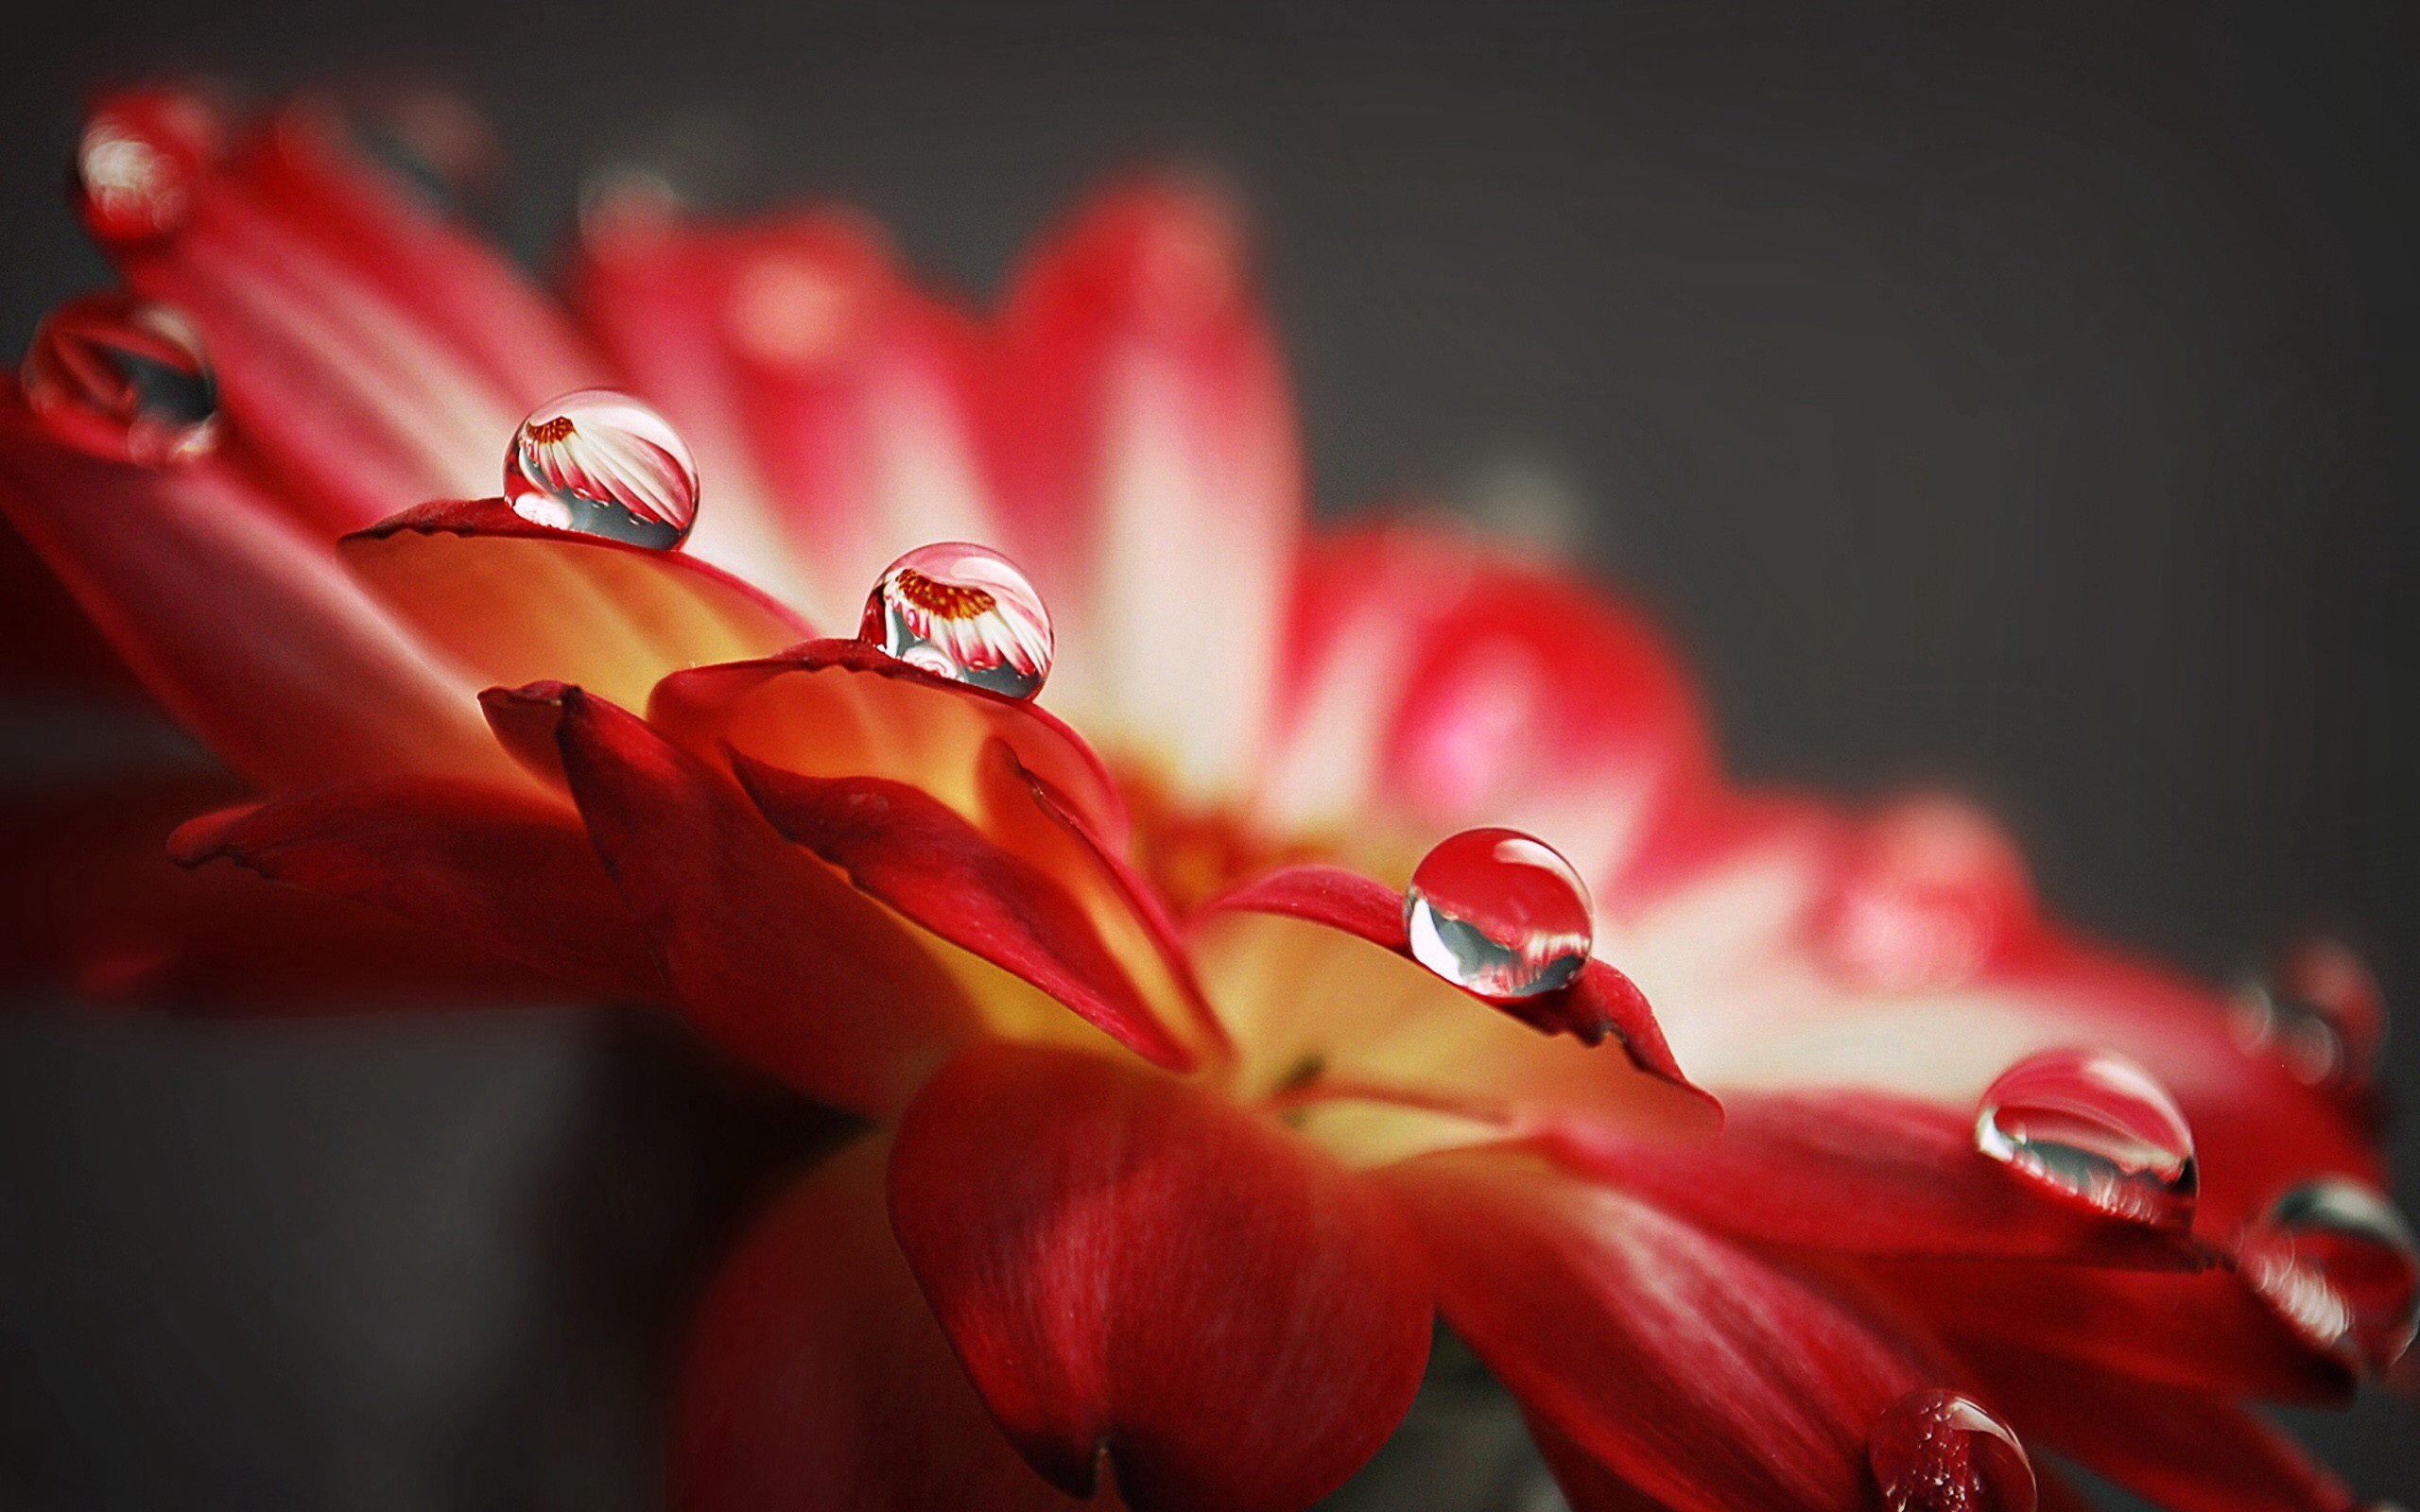 Flower Water Drops wallpapers Flower Water Drops stock photos